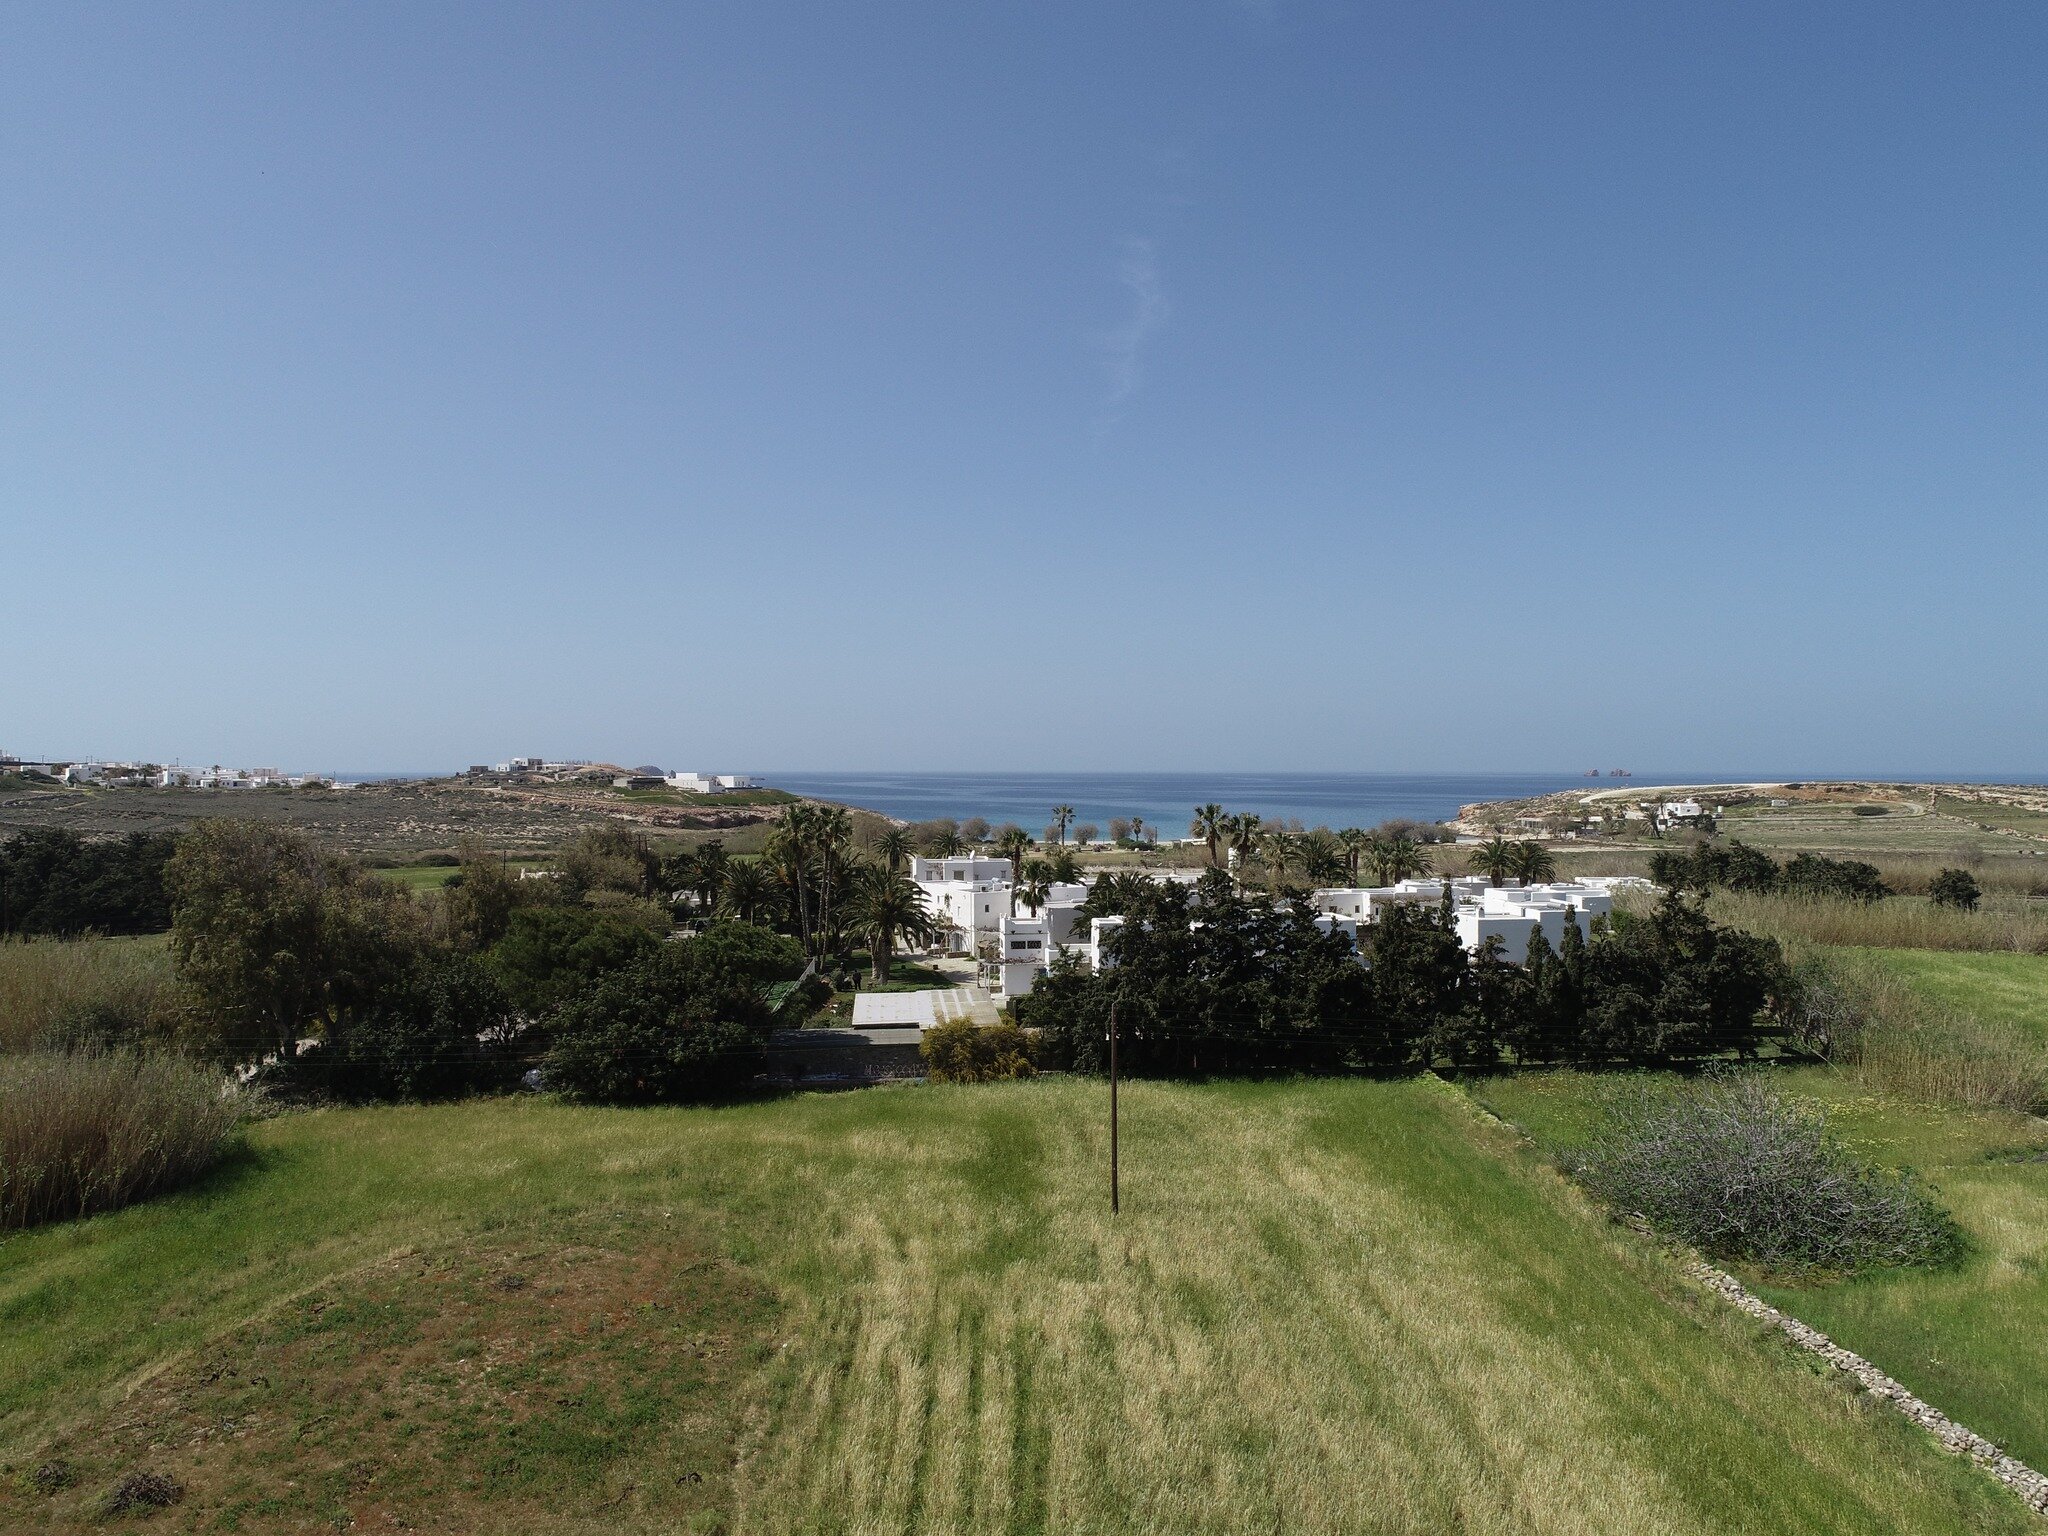 Nestled in the picturesque area of Parasporos, Paros, this 16.278 m2 plot is a step away from the beach, offering an ideal location for building a hotel. With a preauthorized permit for a 1.300 m2 hotel, this plot presents a unique opportunity for ho